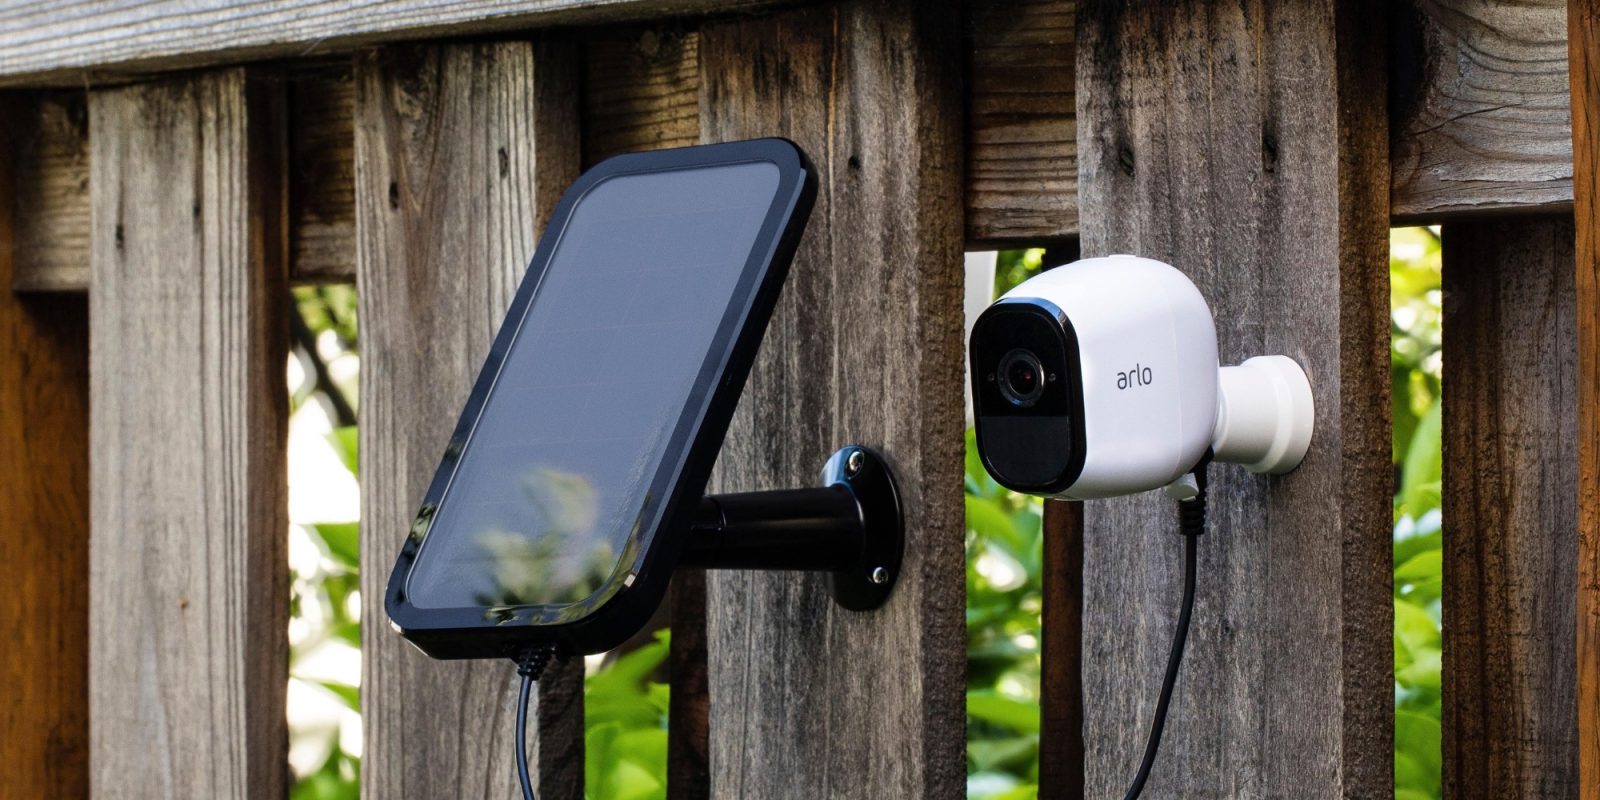 Expand an Arlo camera setup with its official solar panel at 60 (Save 25) 9to5Toys